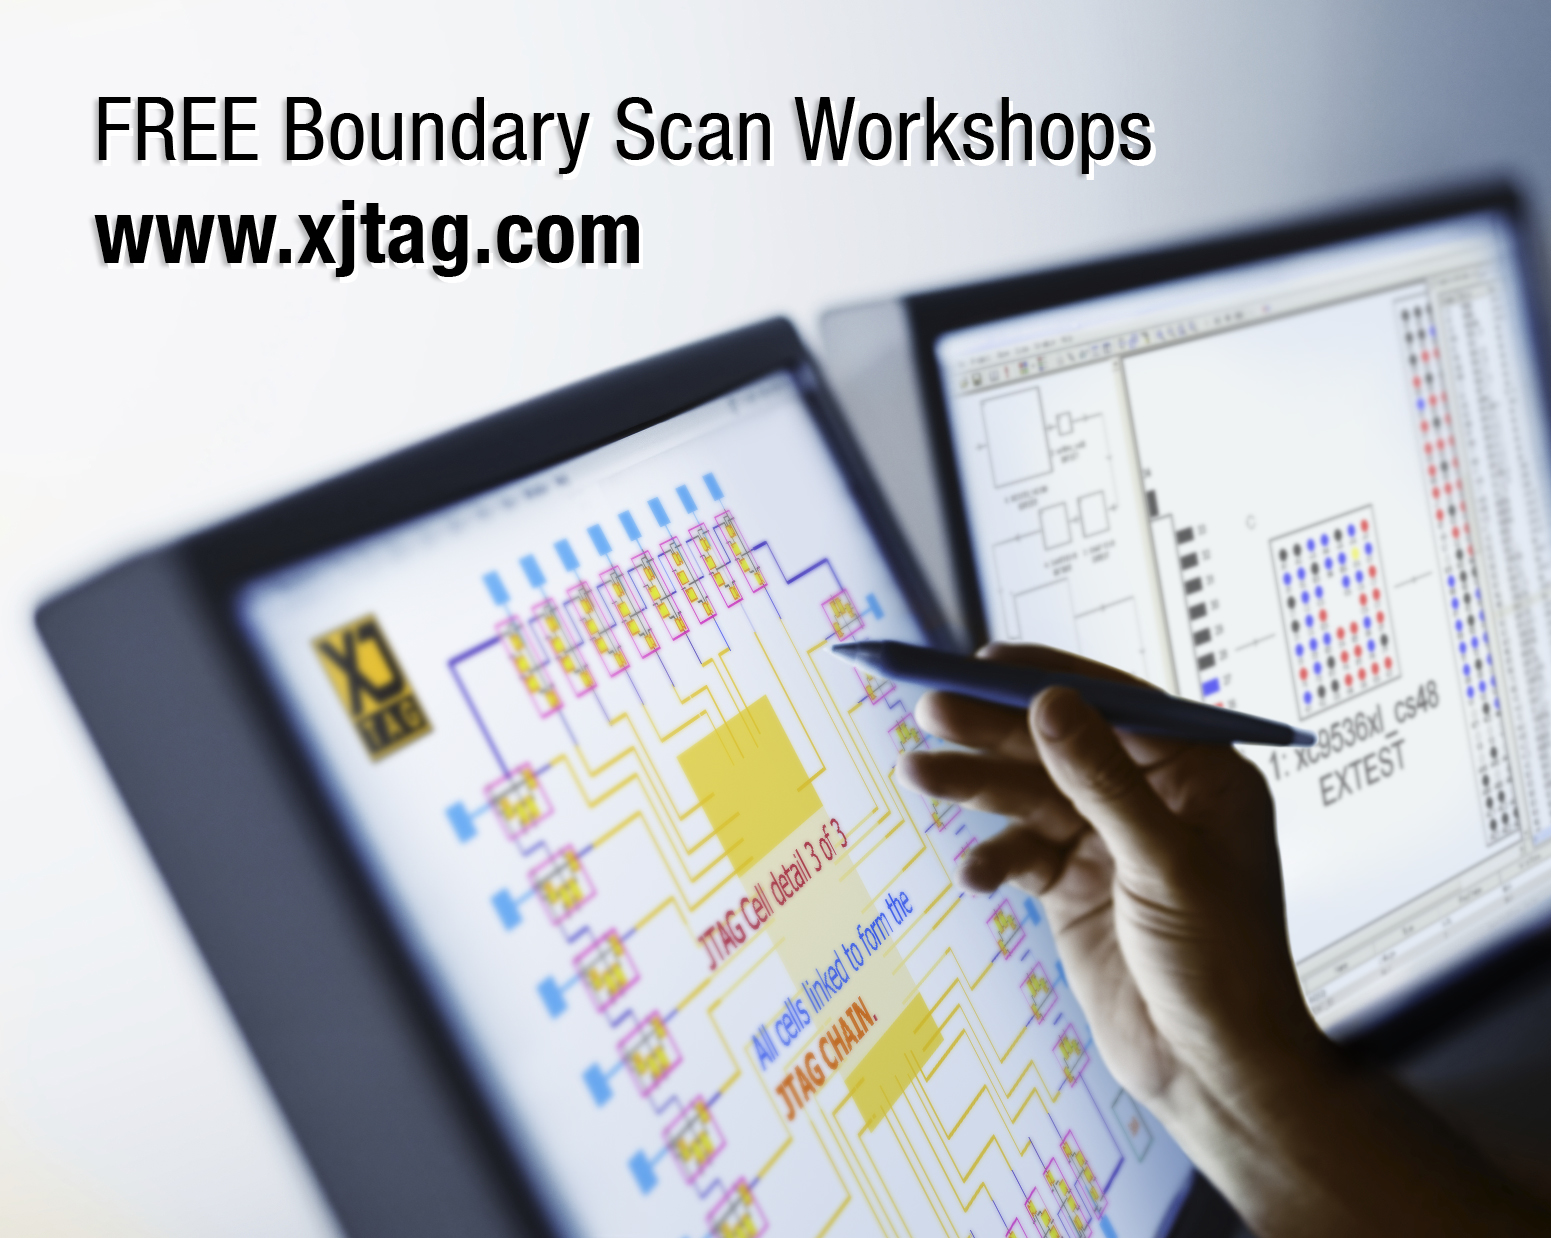 Free hands-on boundary scan workshops at XJTAG